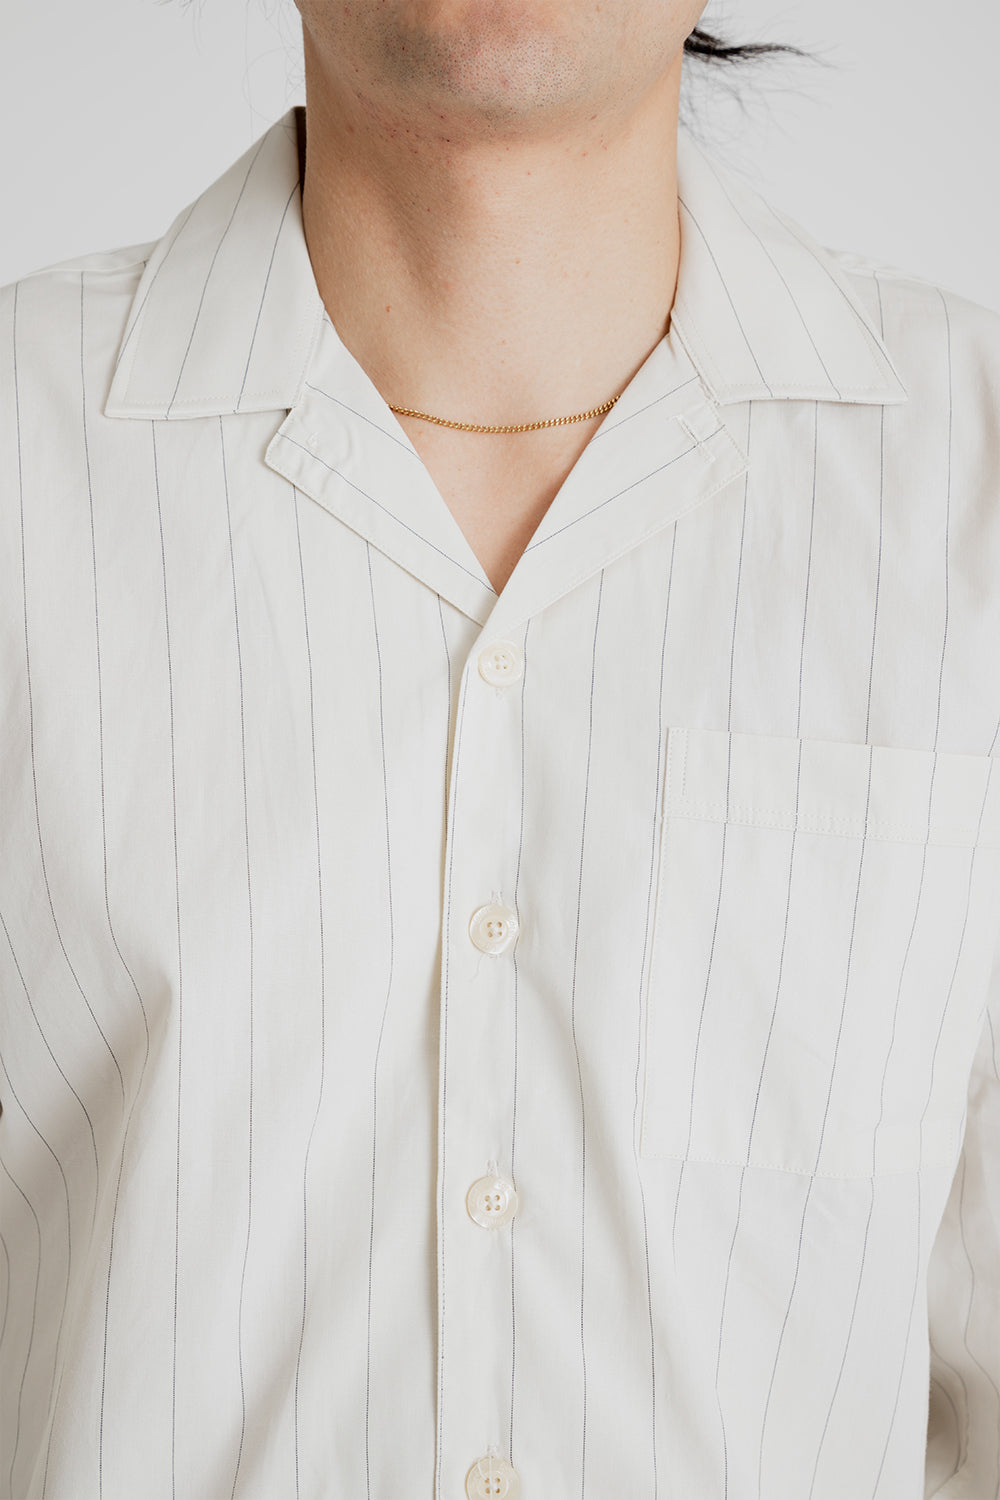 Foret Cruise Shirt in Cloud/Stripe